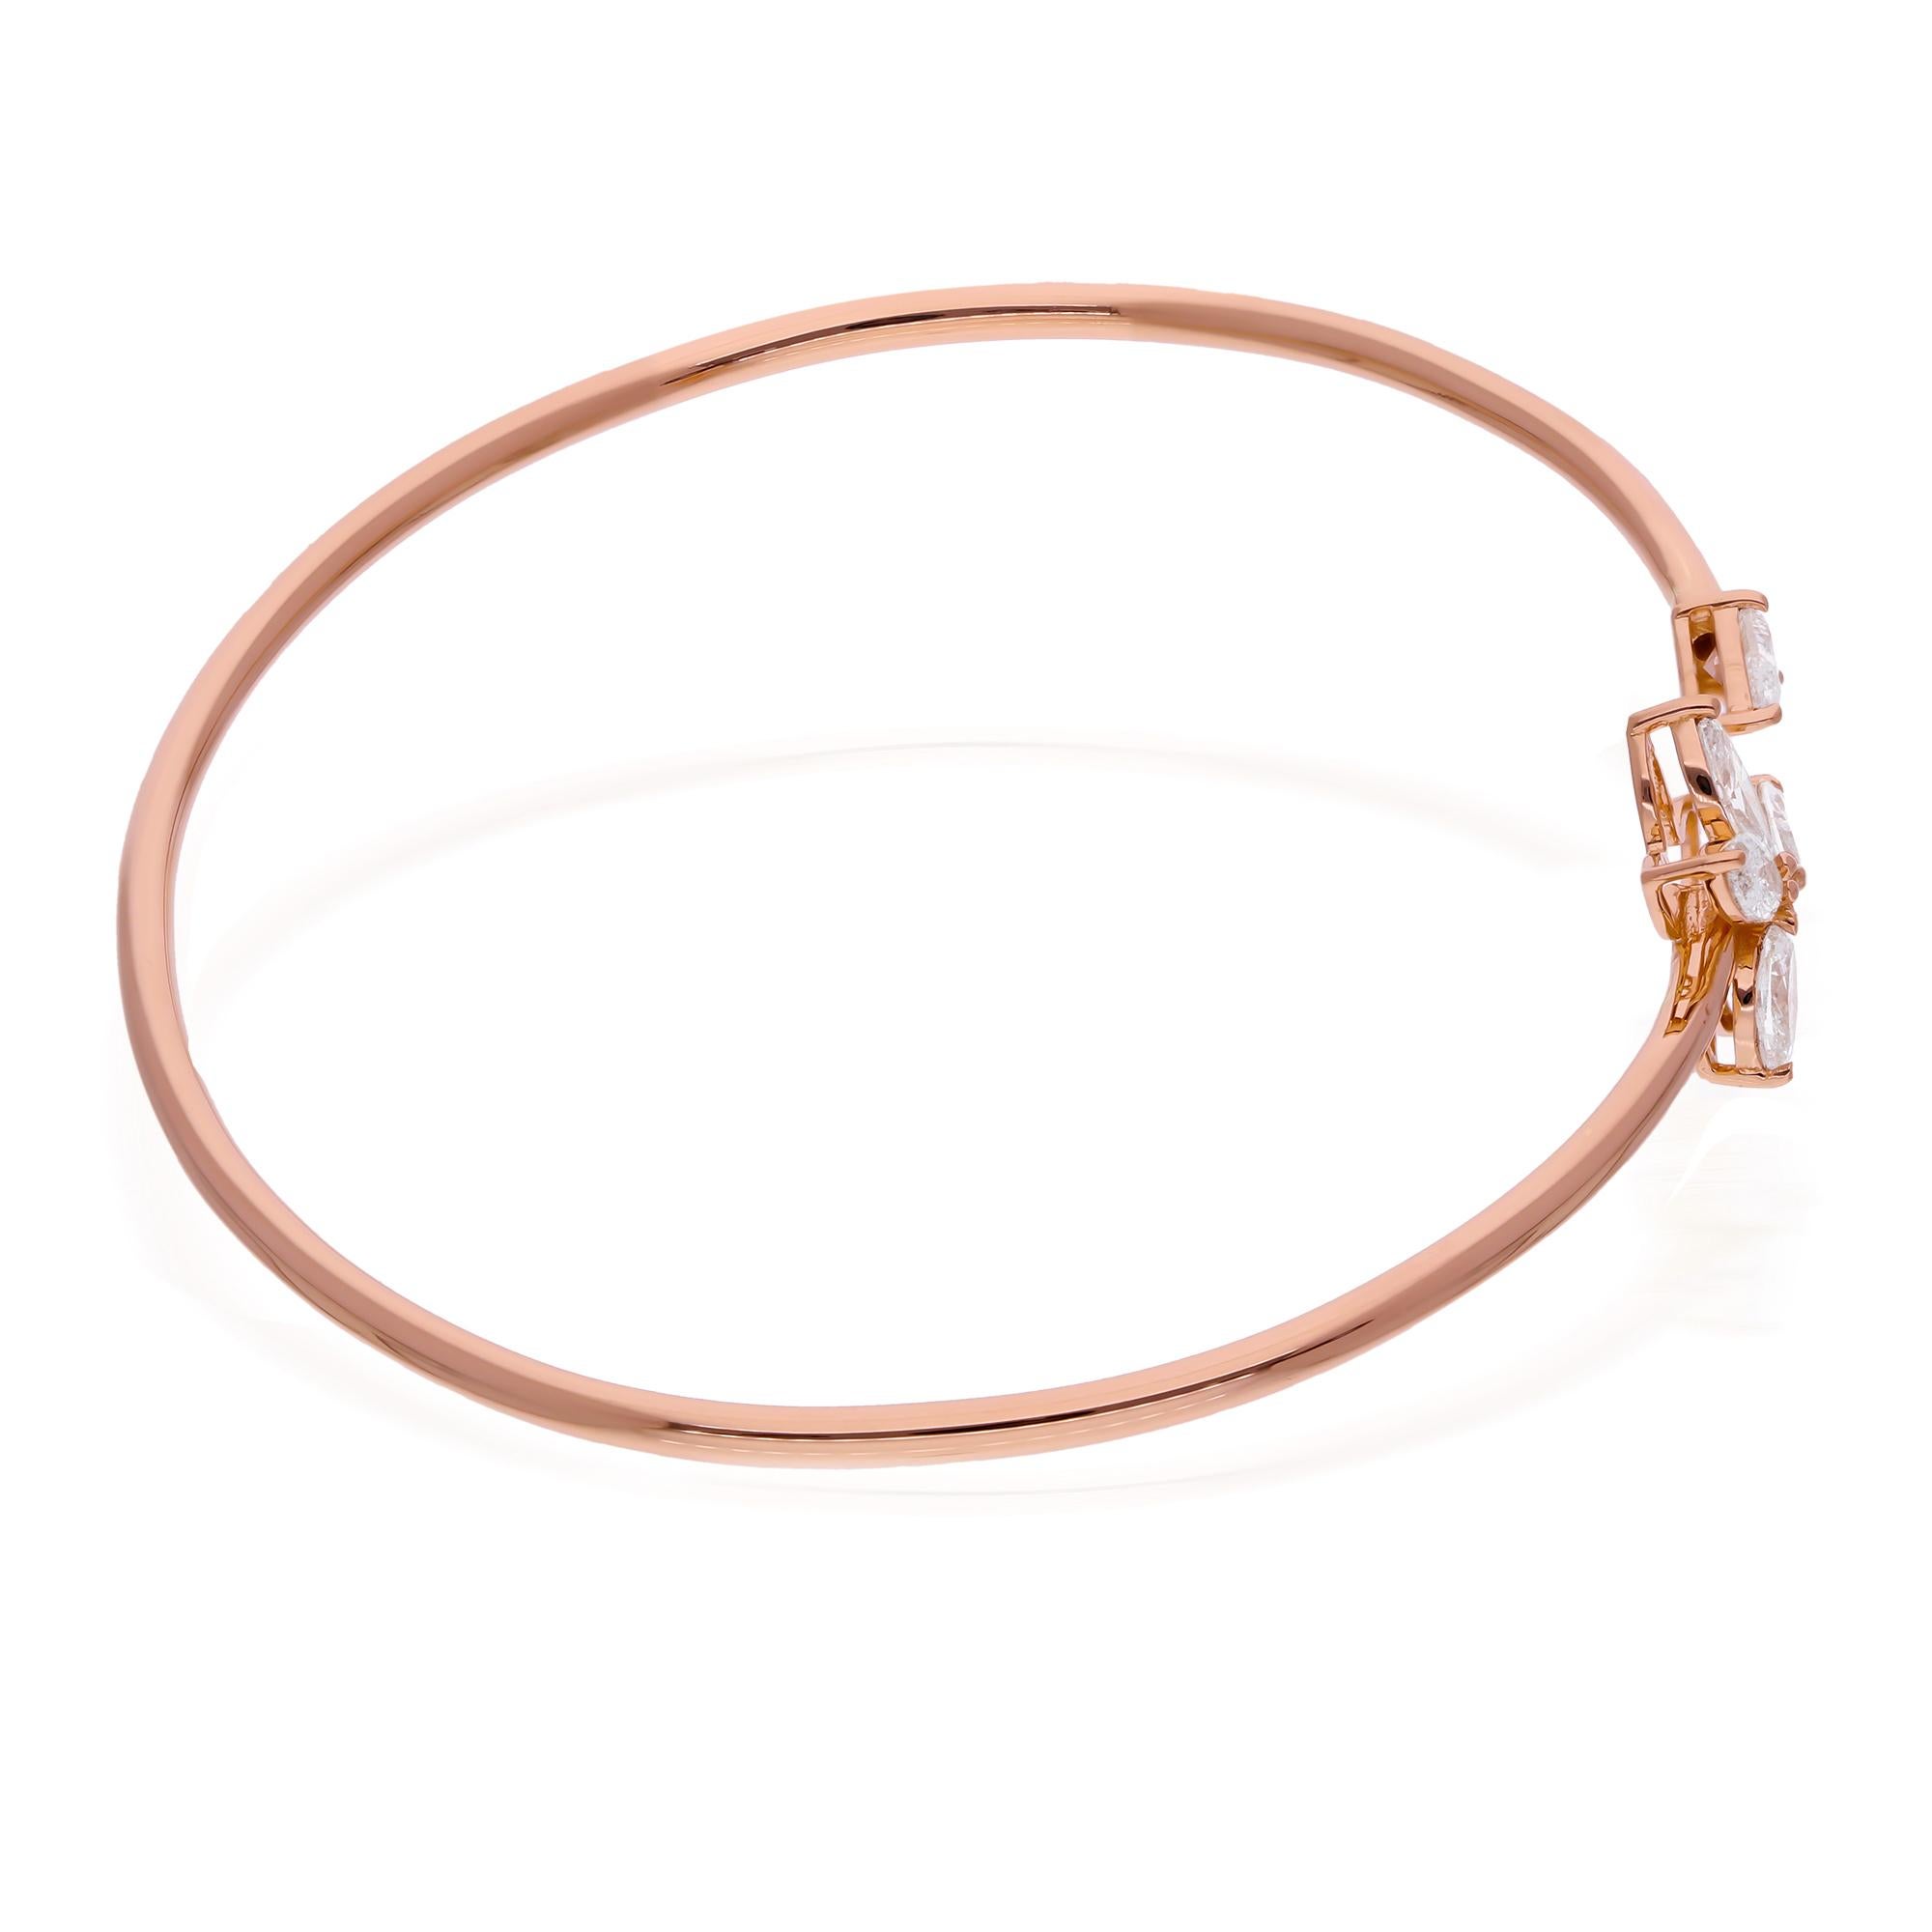 The warm embrace of 14 karat rose gold lends a soft, romantic hue to the piece, complementing the dazzling diamonds with its lustrous glow. The smooth curves of the cuff bracelet wrap around the wrist with effortless grace, offering both comfort and